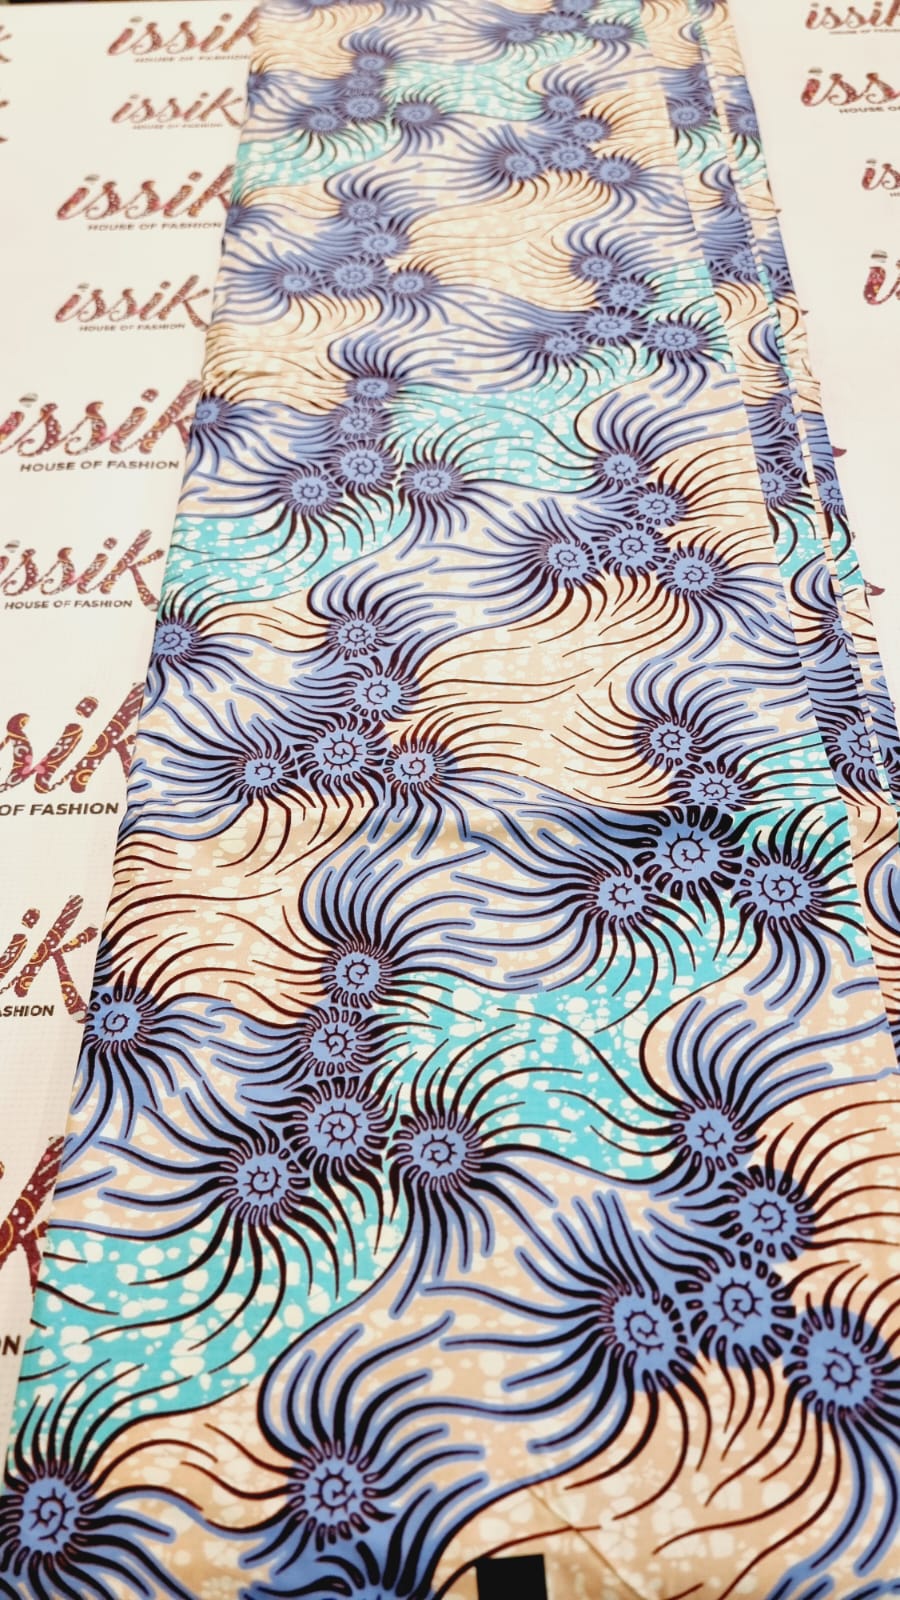 Purple & Blue African Print Fabric - House of Prints